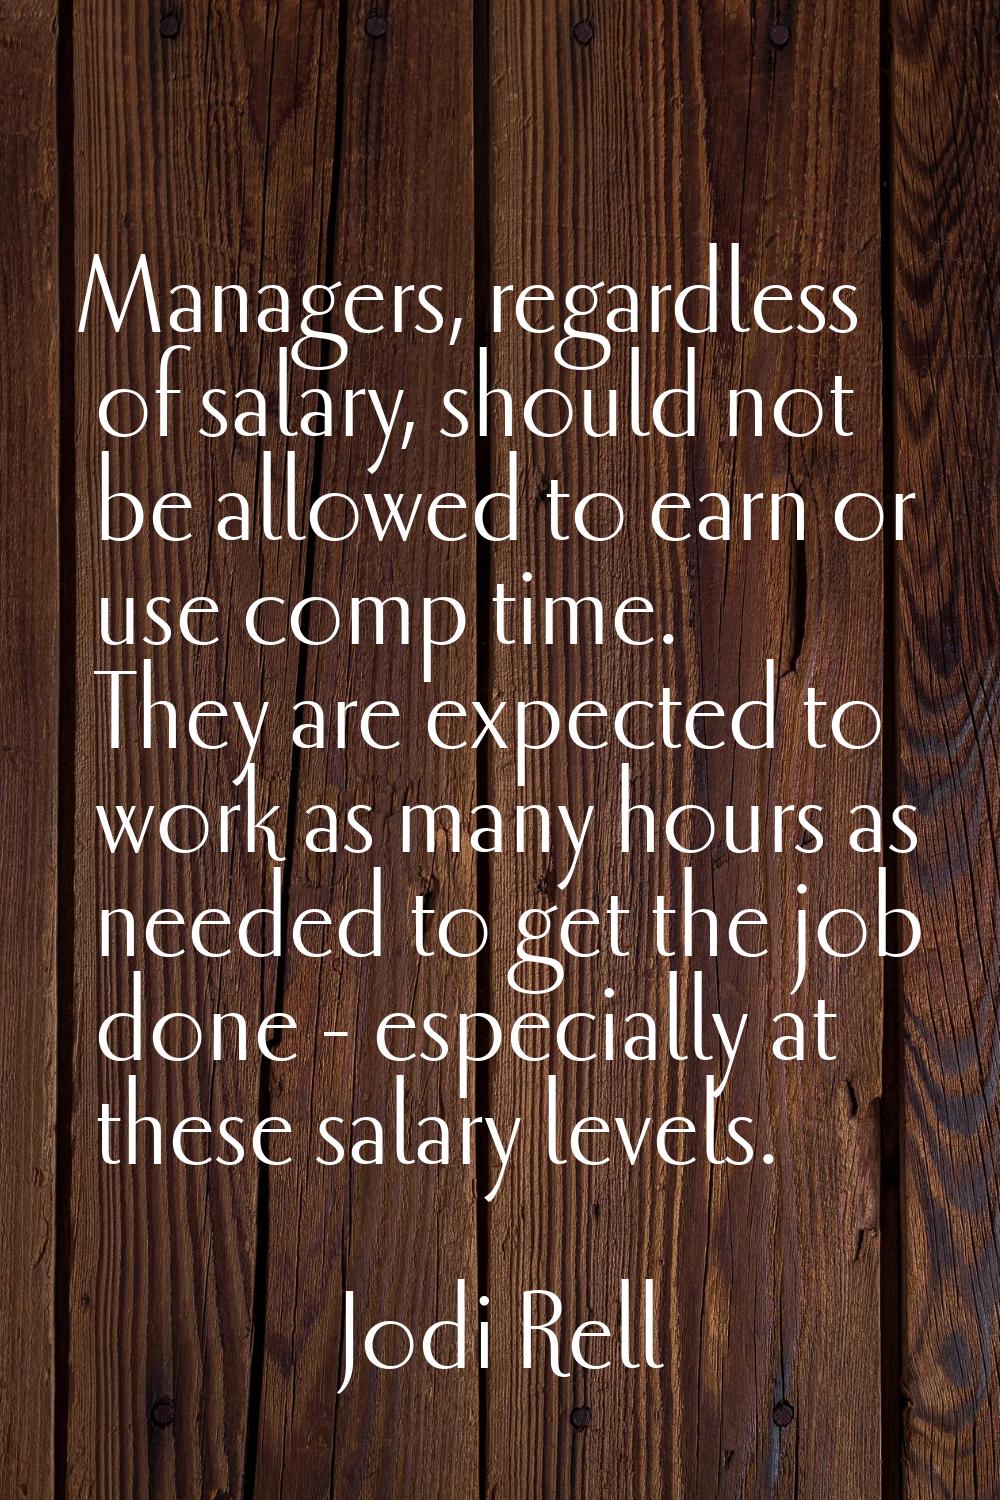 Managers, regardless of salary, should not be allowed to earn or use comp time. They are expected t